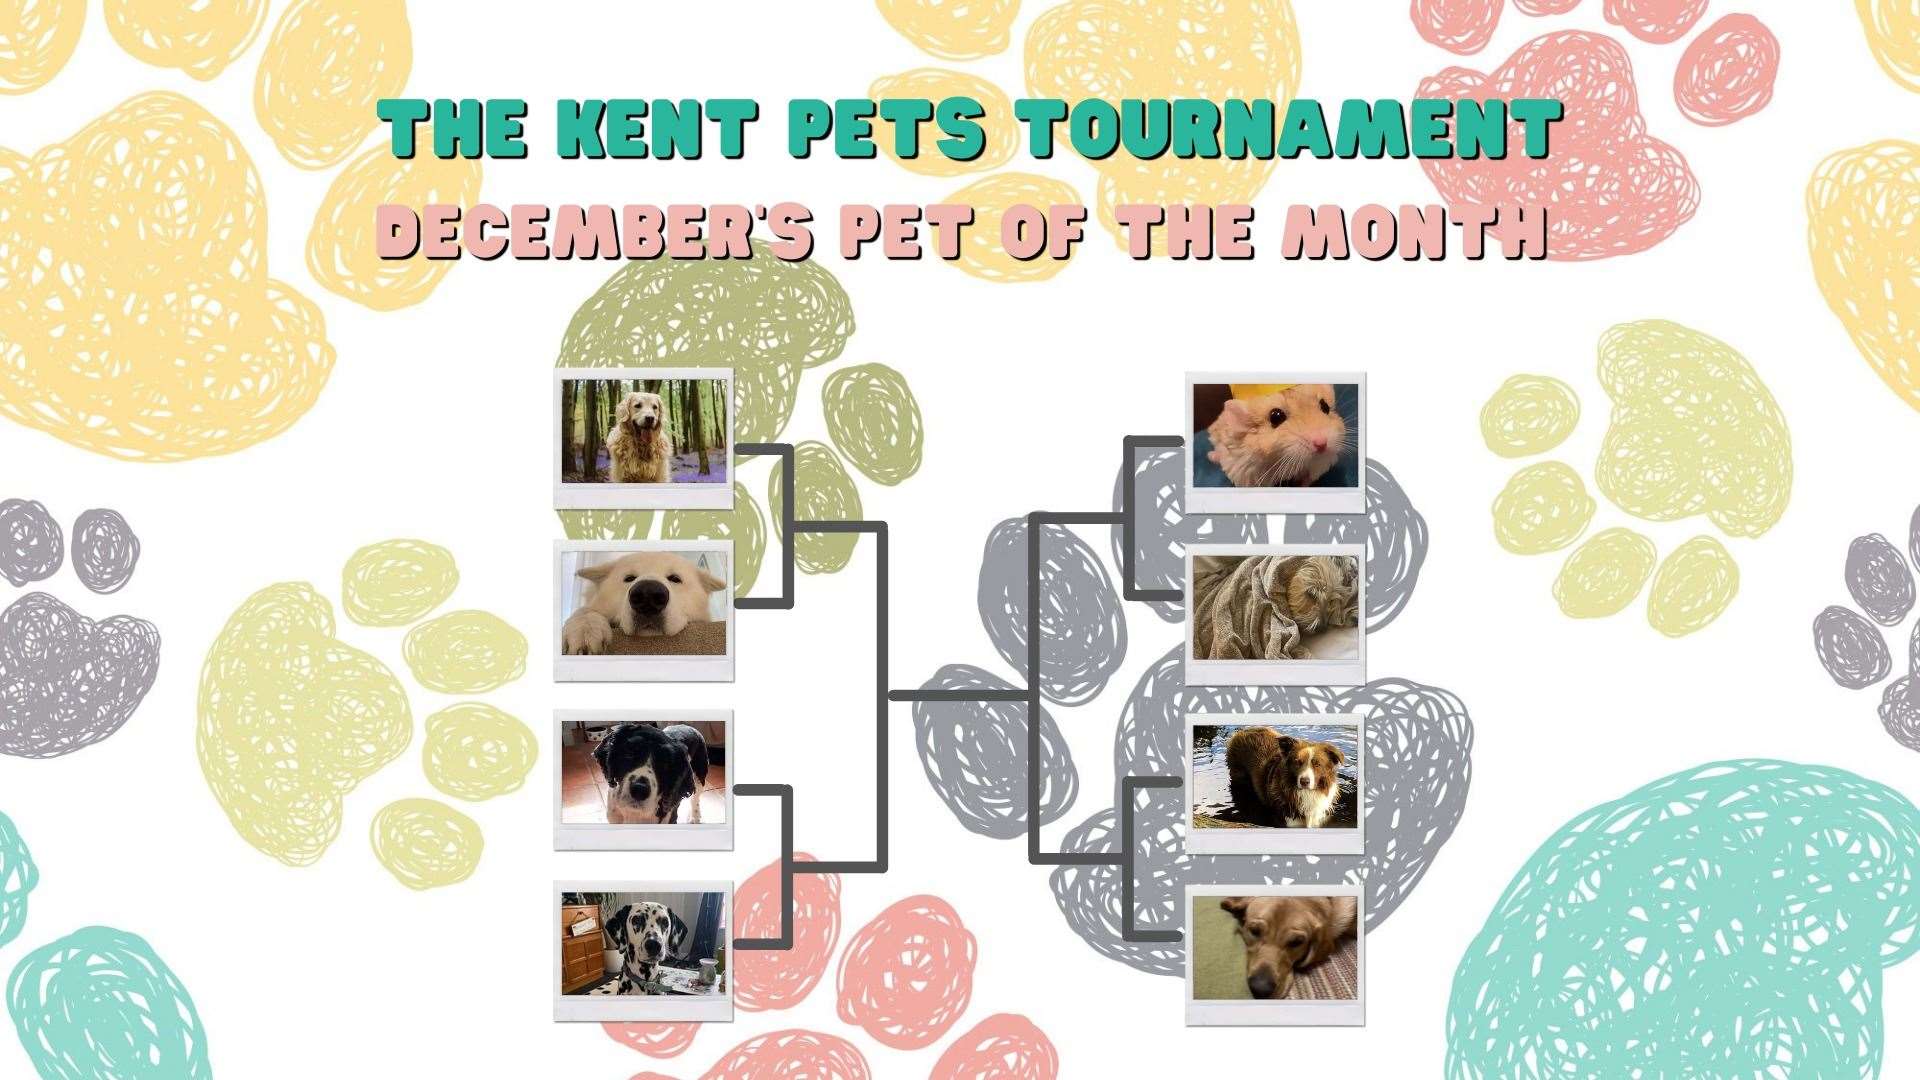 Who do you think should take part in the next round of the Kent Pets Tournament?